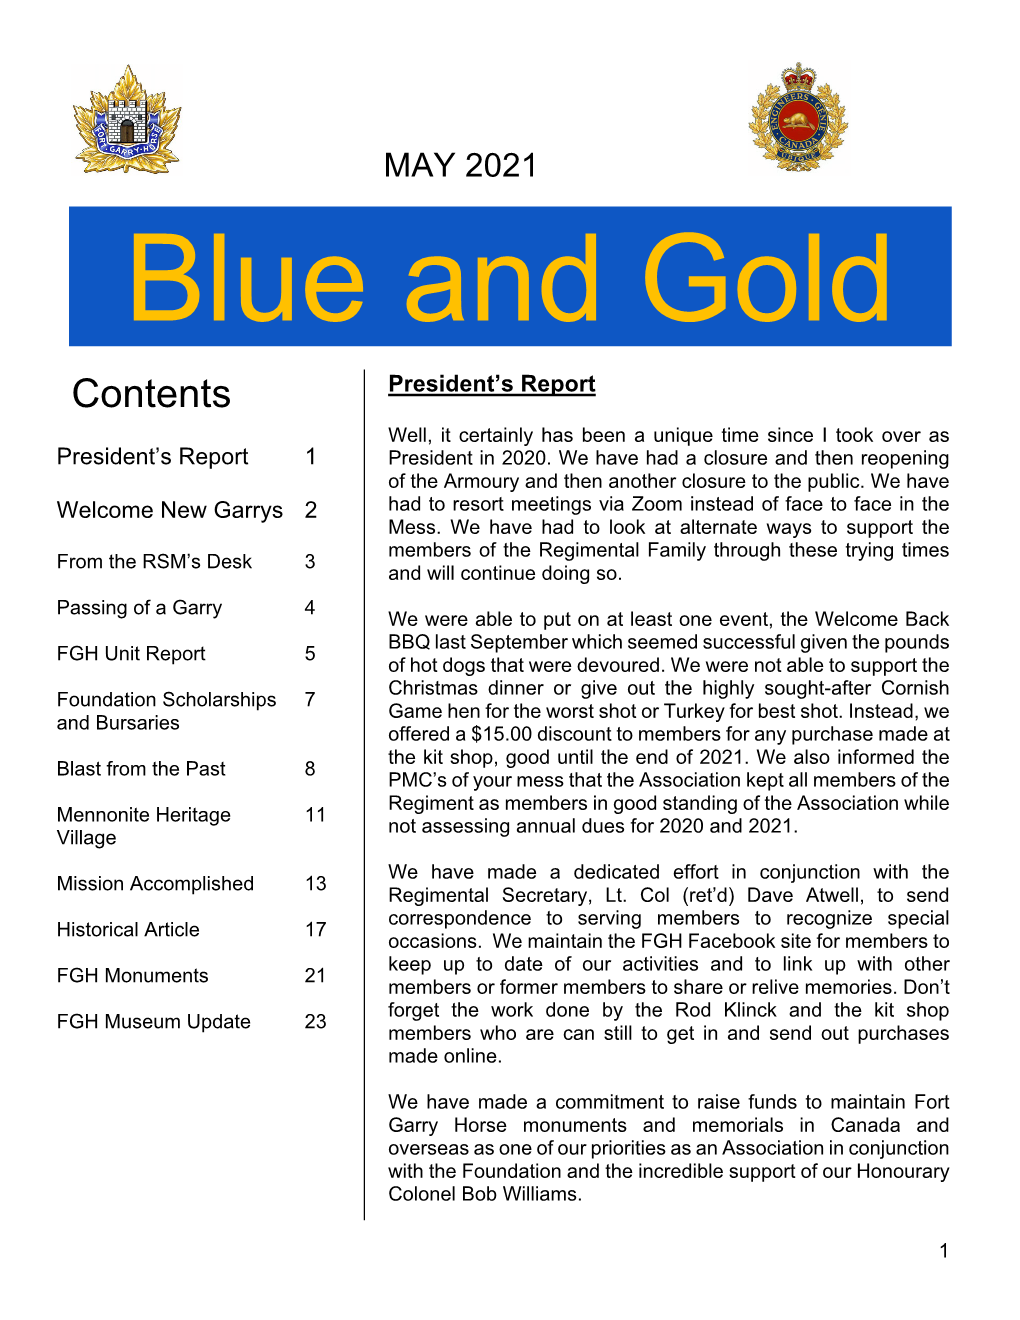 20210500 Blue and Gold